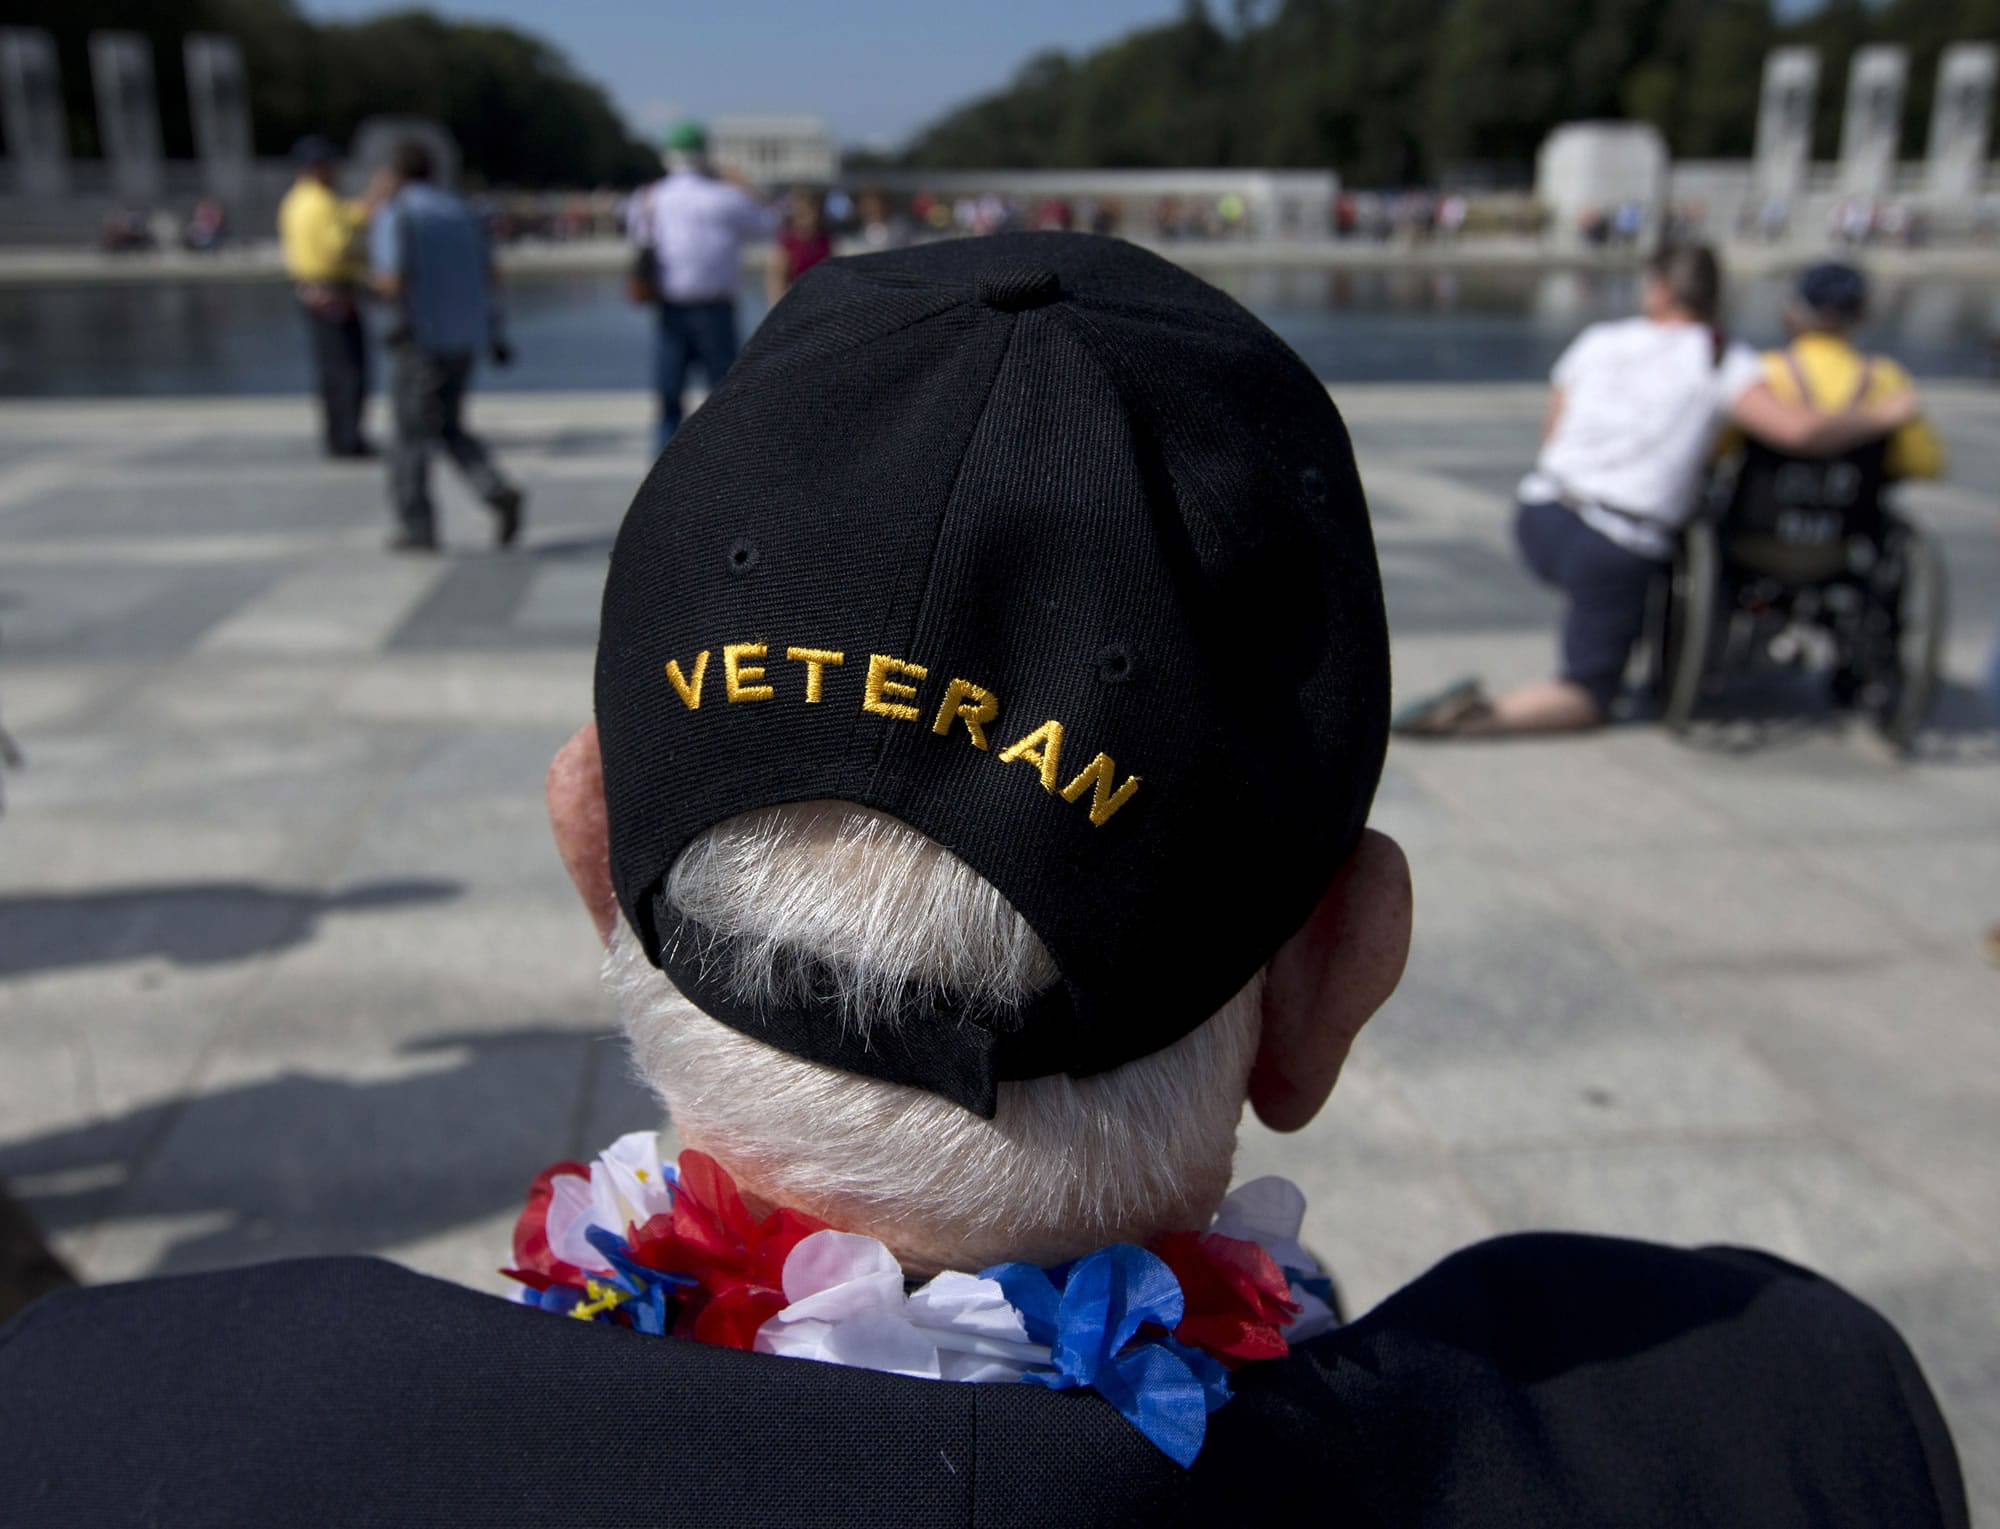 World War II Veteran George Bloss, from Gulfport, Miss., looks out over the National World War II Memorial in Washington on Tuesday. Veterans who had traveled from across the country were allowed to visit the National World War II Memorial after it had been officially closed because of the partial government shutdown.